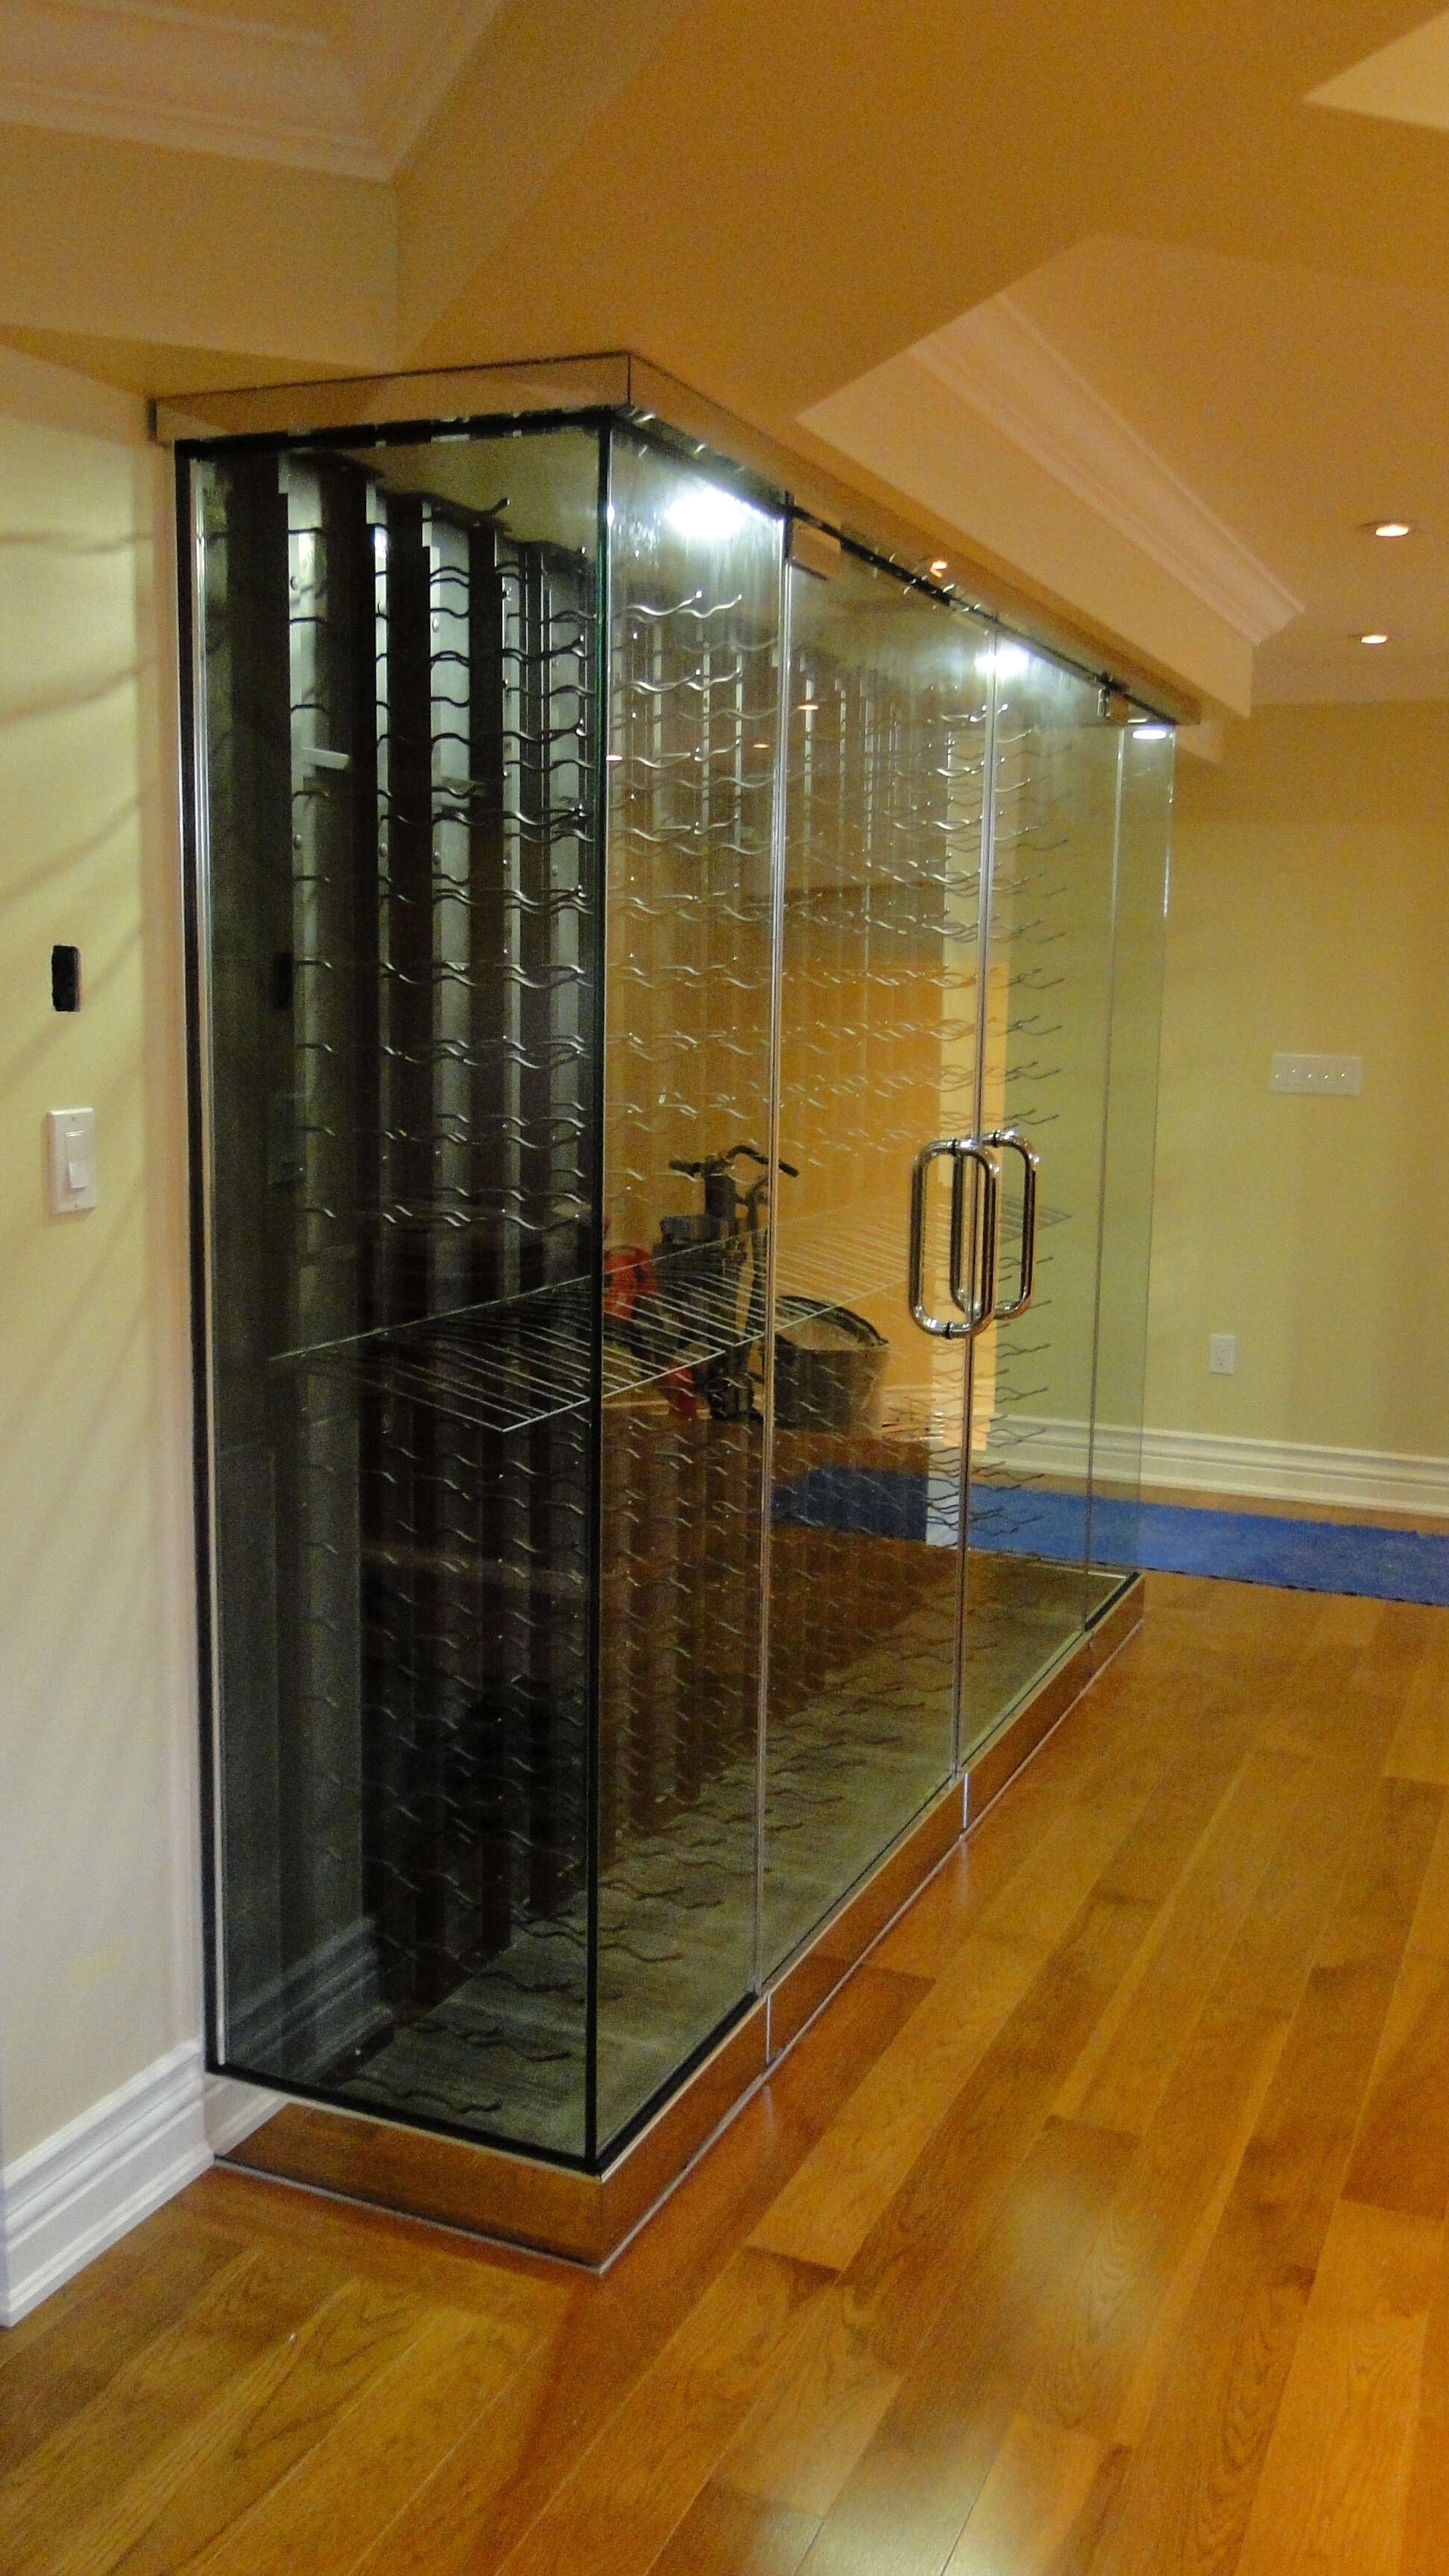 VV platinum racking system. Features custom glass enclosure and hidden cooling system.